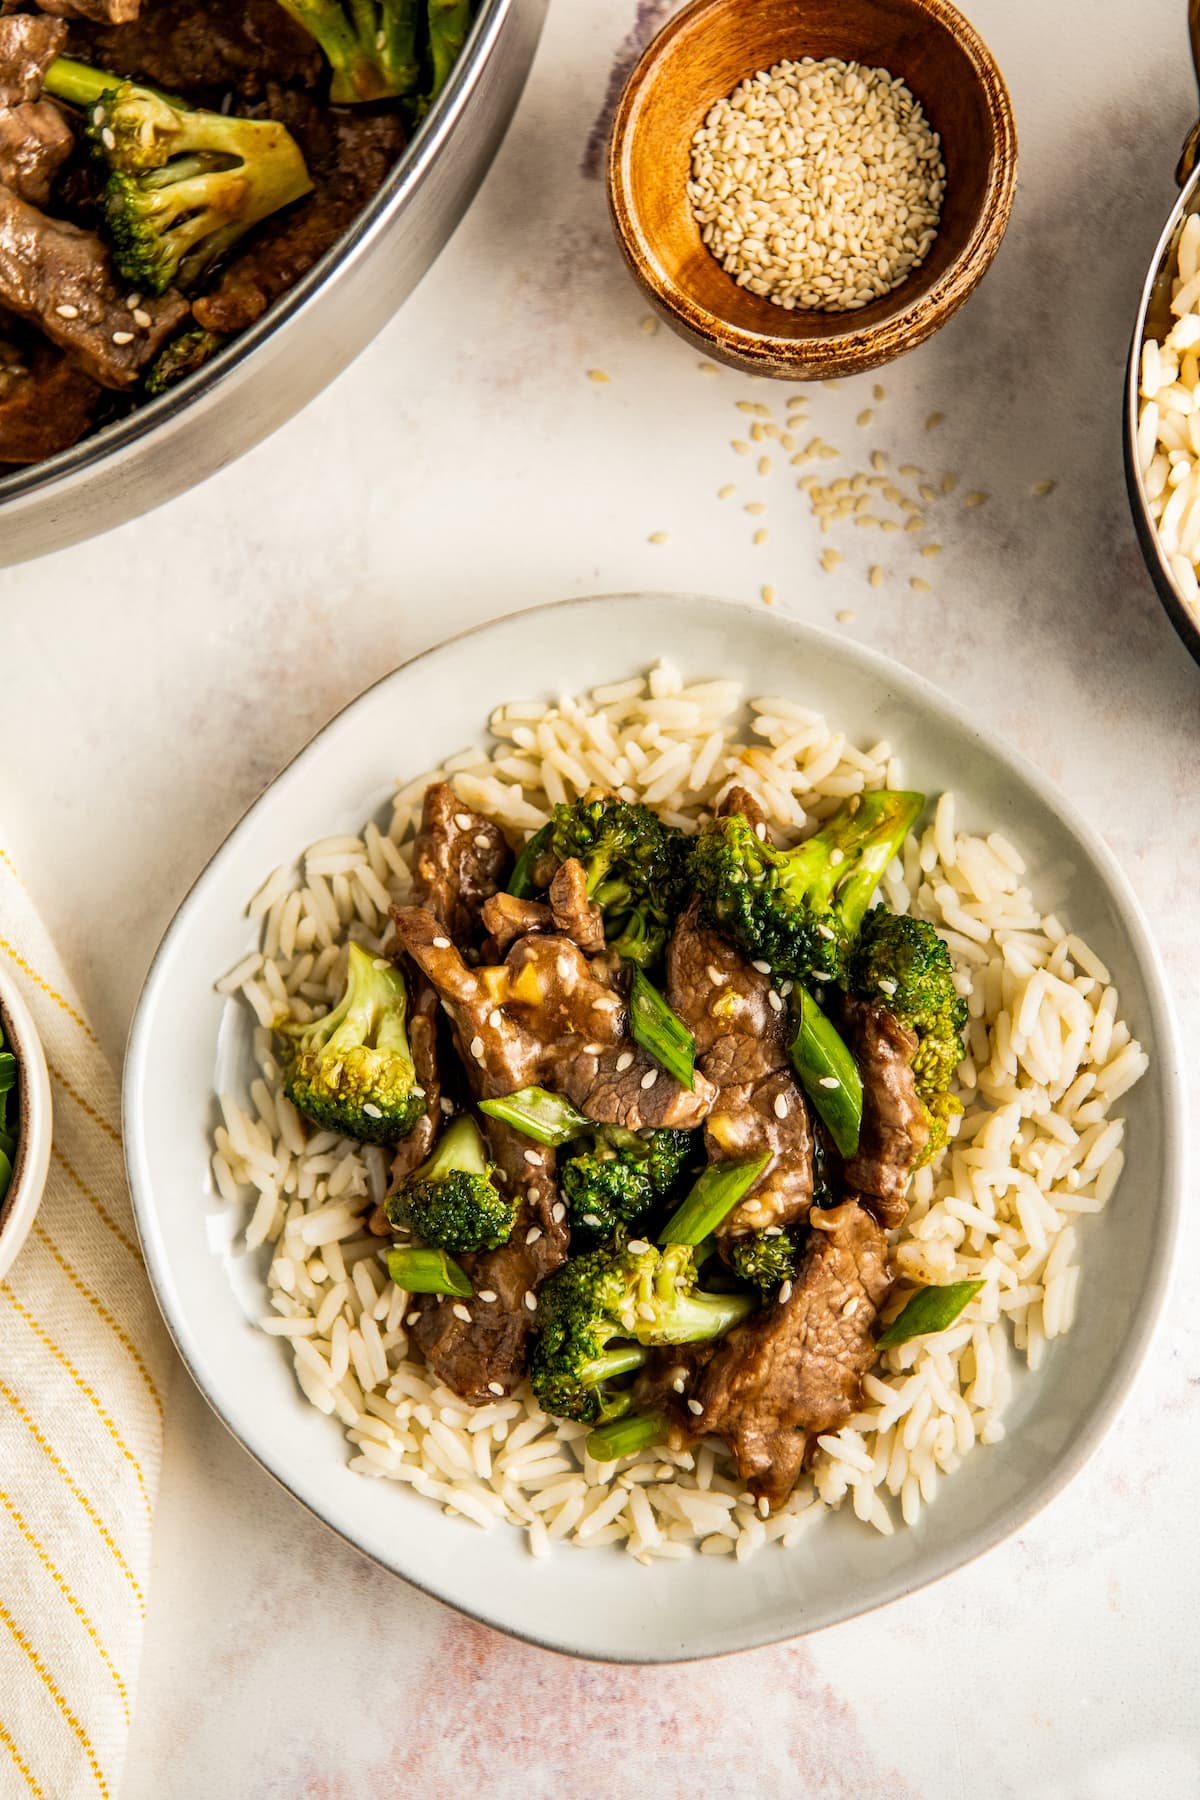 A bowl of beef and broccoli over white rice with a bowl of sesame seeds in the background.